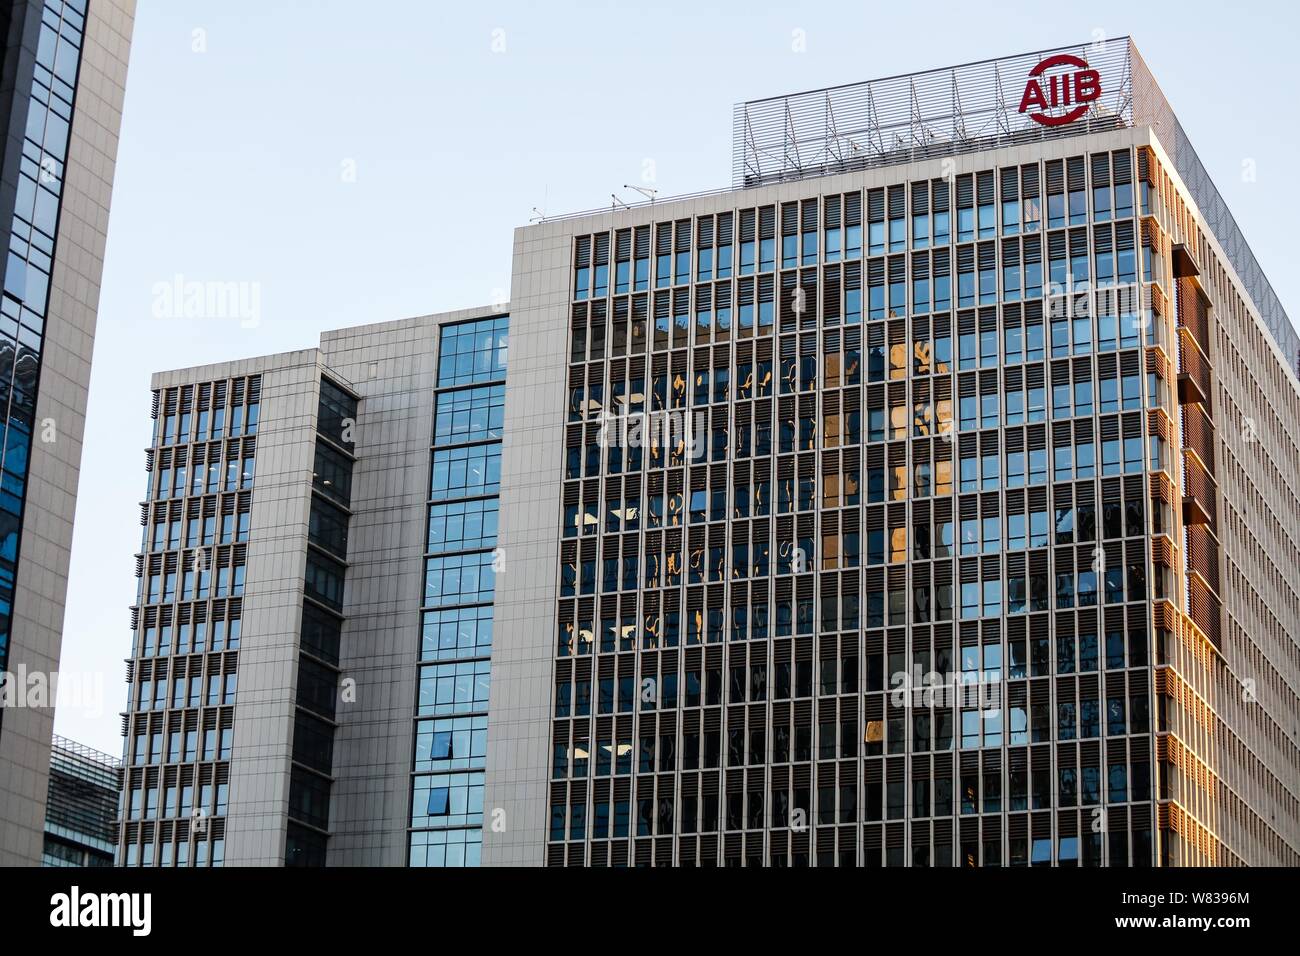 File A View Of The Headquarters Building Of The Asian Infrastructure Investment Bank Aiib In Beijing China 28 September 2016 The Asian Infra Stock Photo Alamy